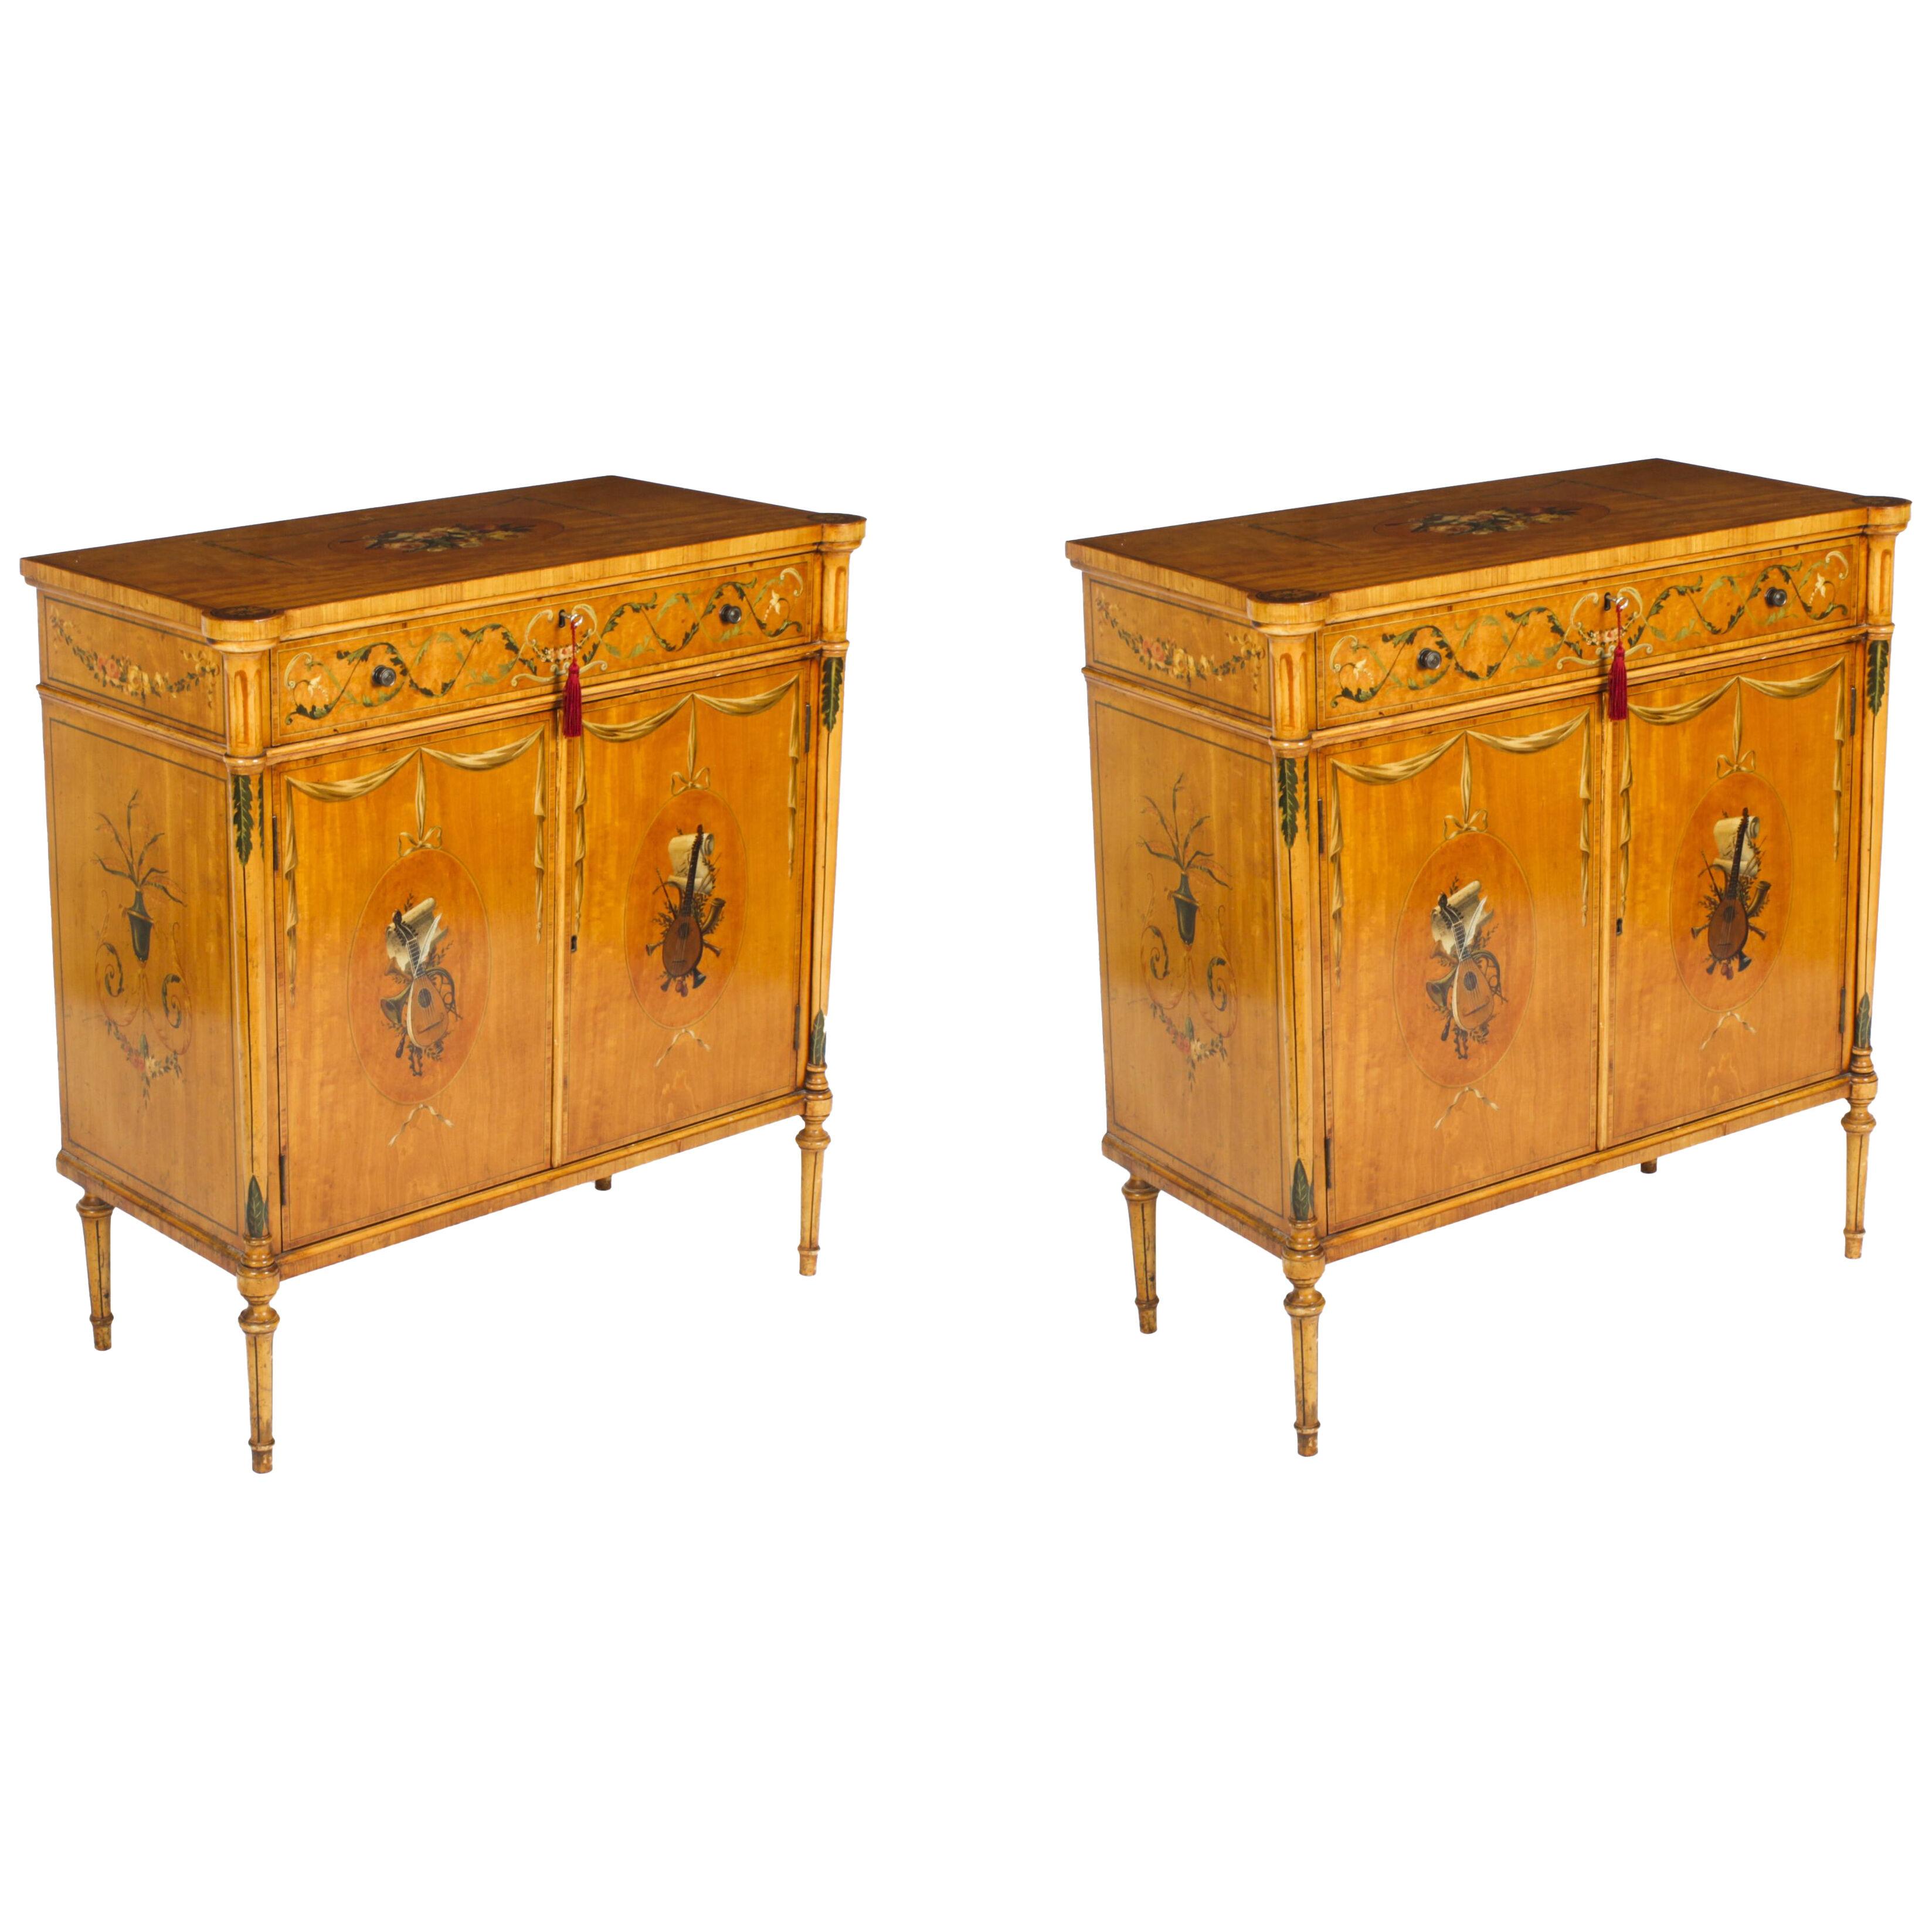 Antique Pair Adam Revival Satinwood Side Cabinets Commodes 19th C